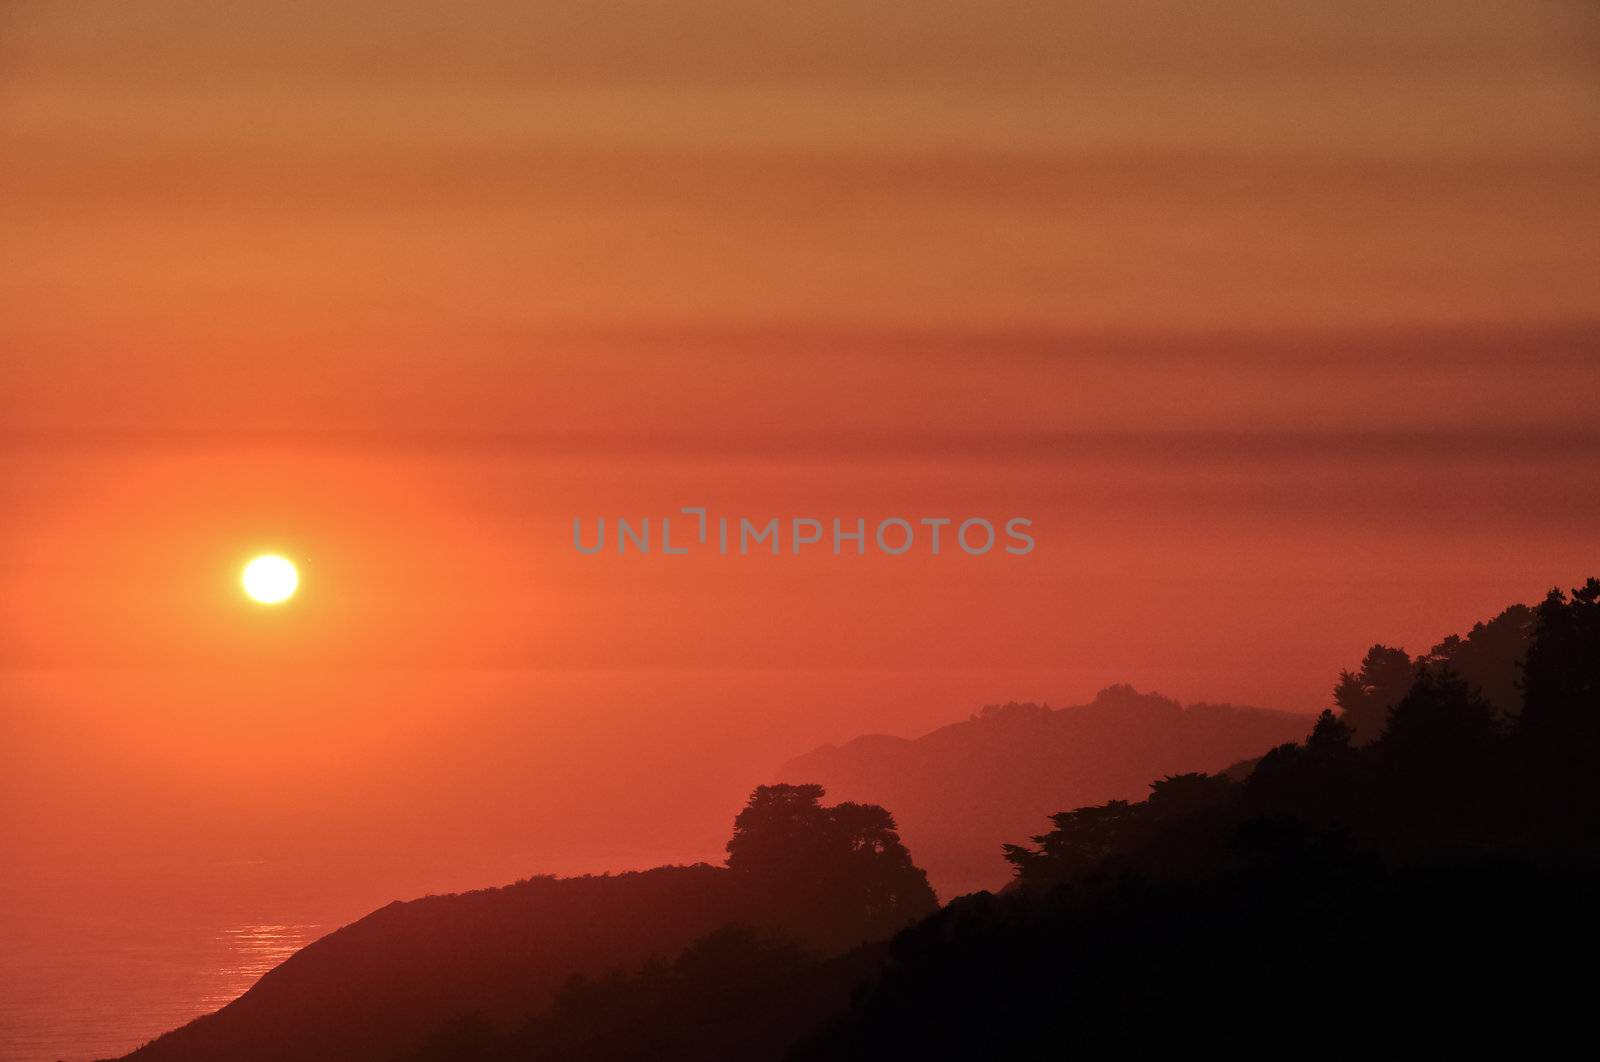 California Big Sur coast orange sunset with mountains silhouette by martinm303